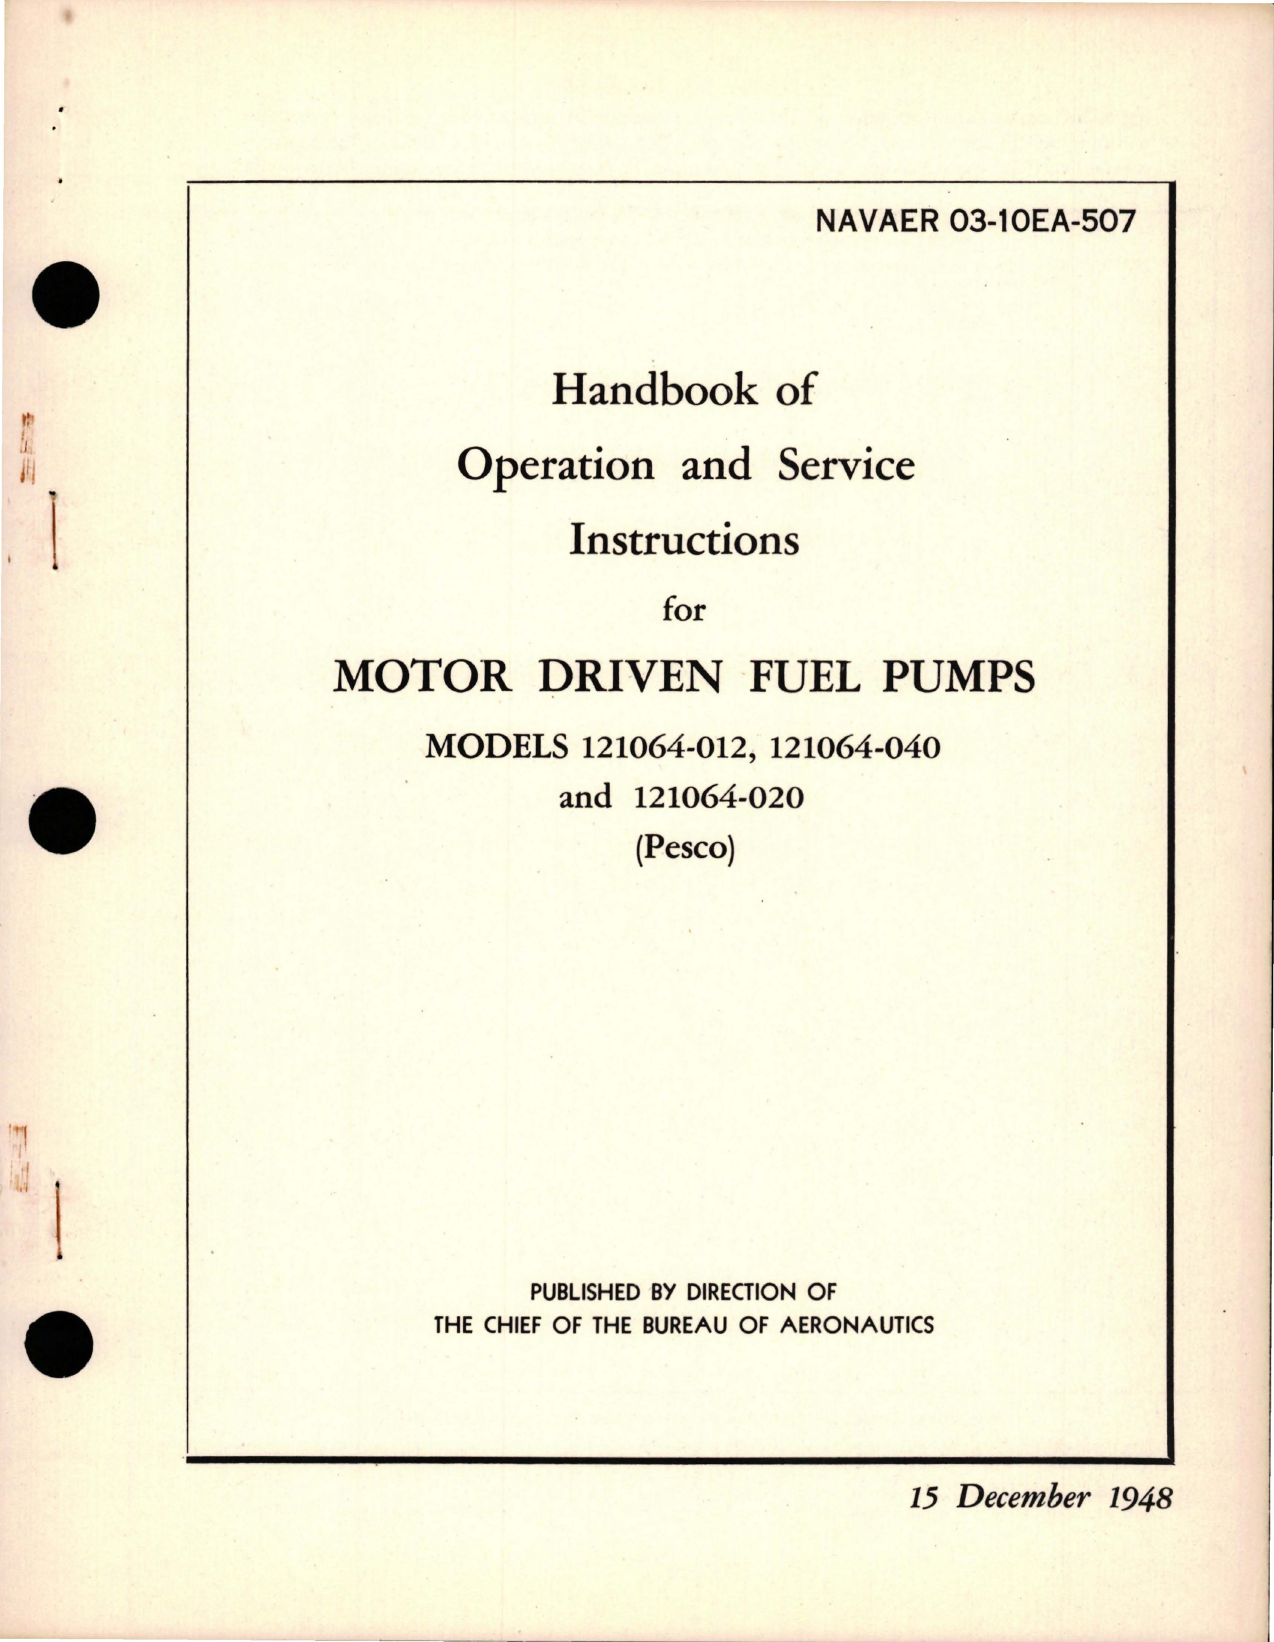 Sample page 1 from AirCorps Library document: Operation and Service Instructions for Motor Driven Fuel Pumps - Models 121064-012, 121064-040, and 121064-020